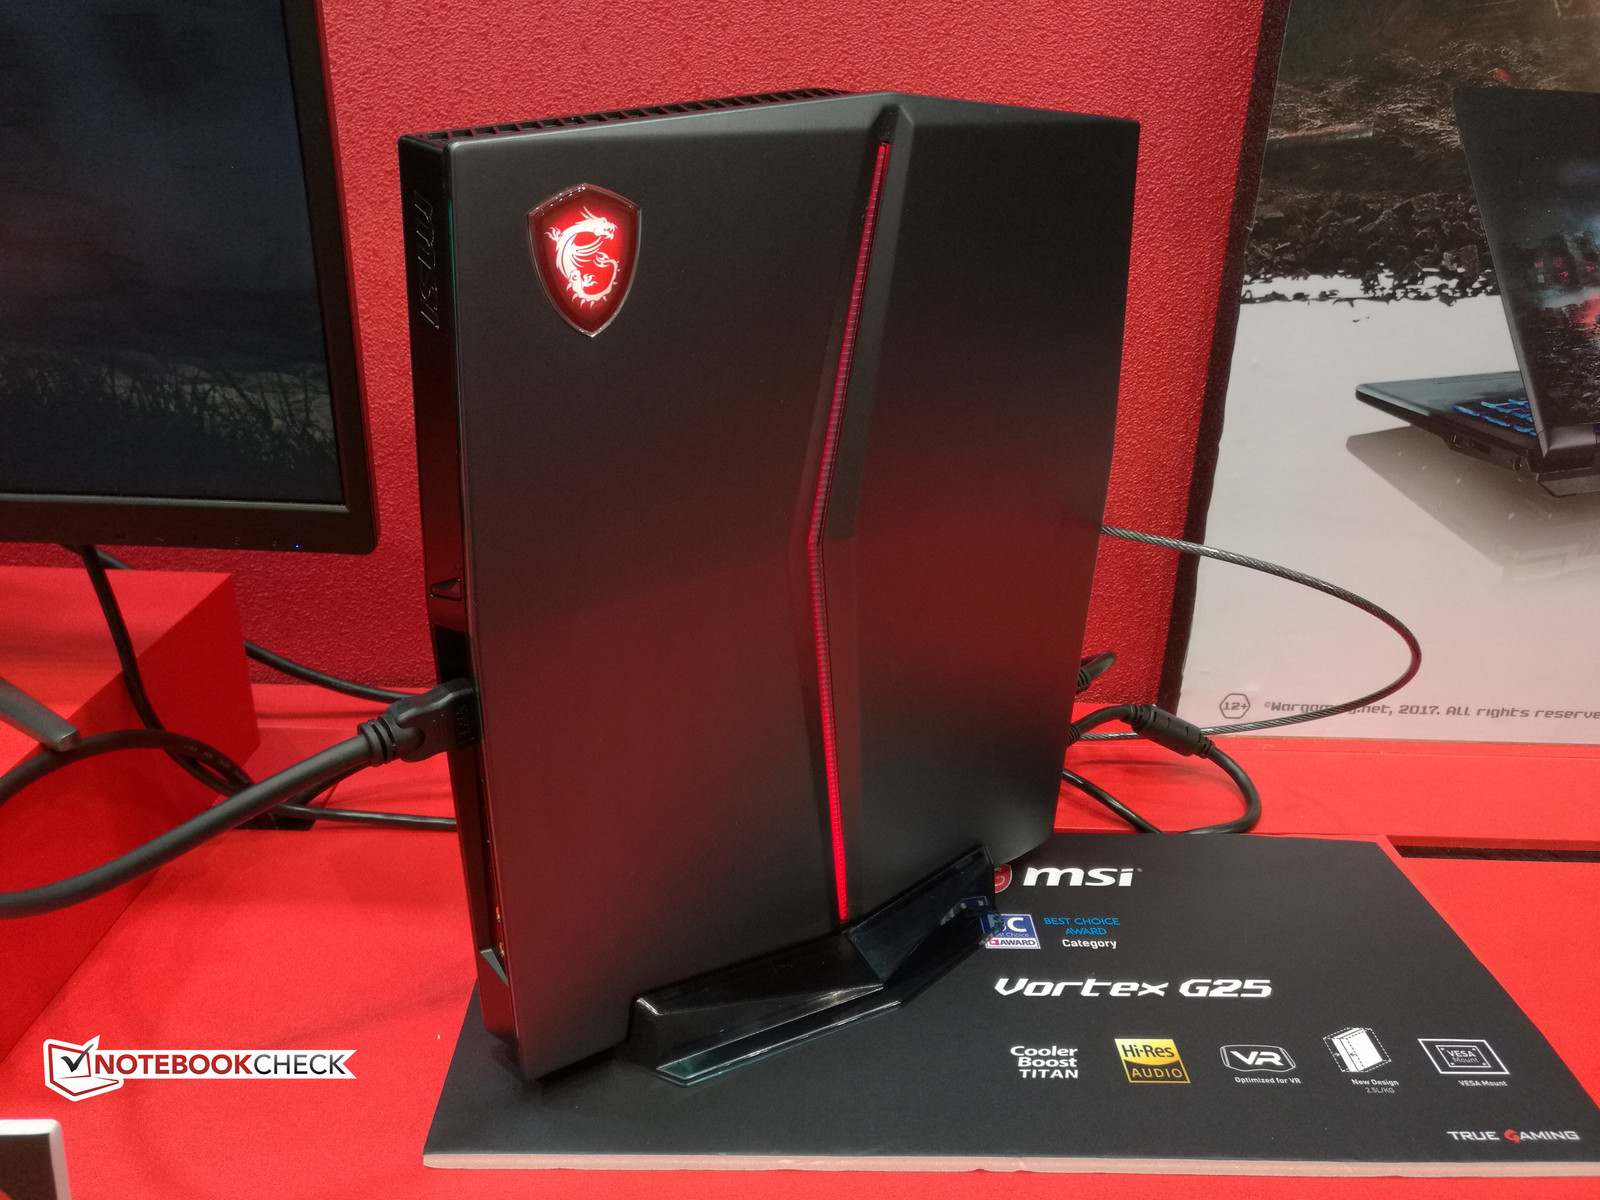 MSI launches the Trident, a console sized VR gaming PC -   News